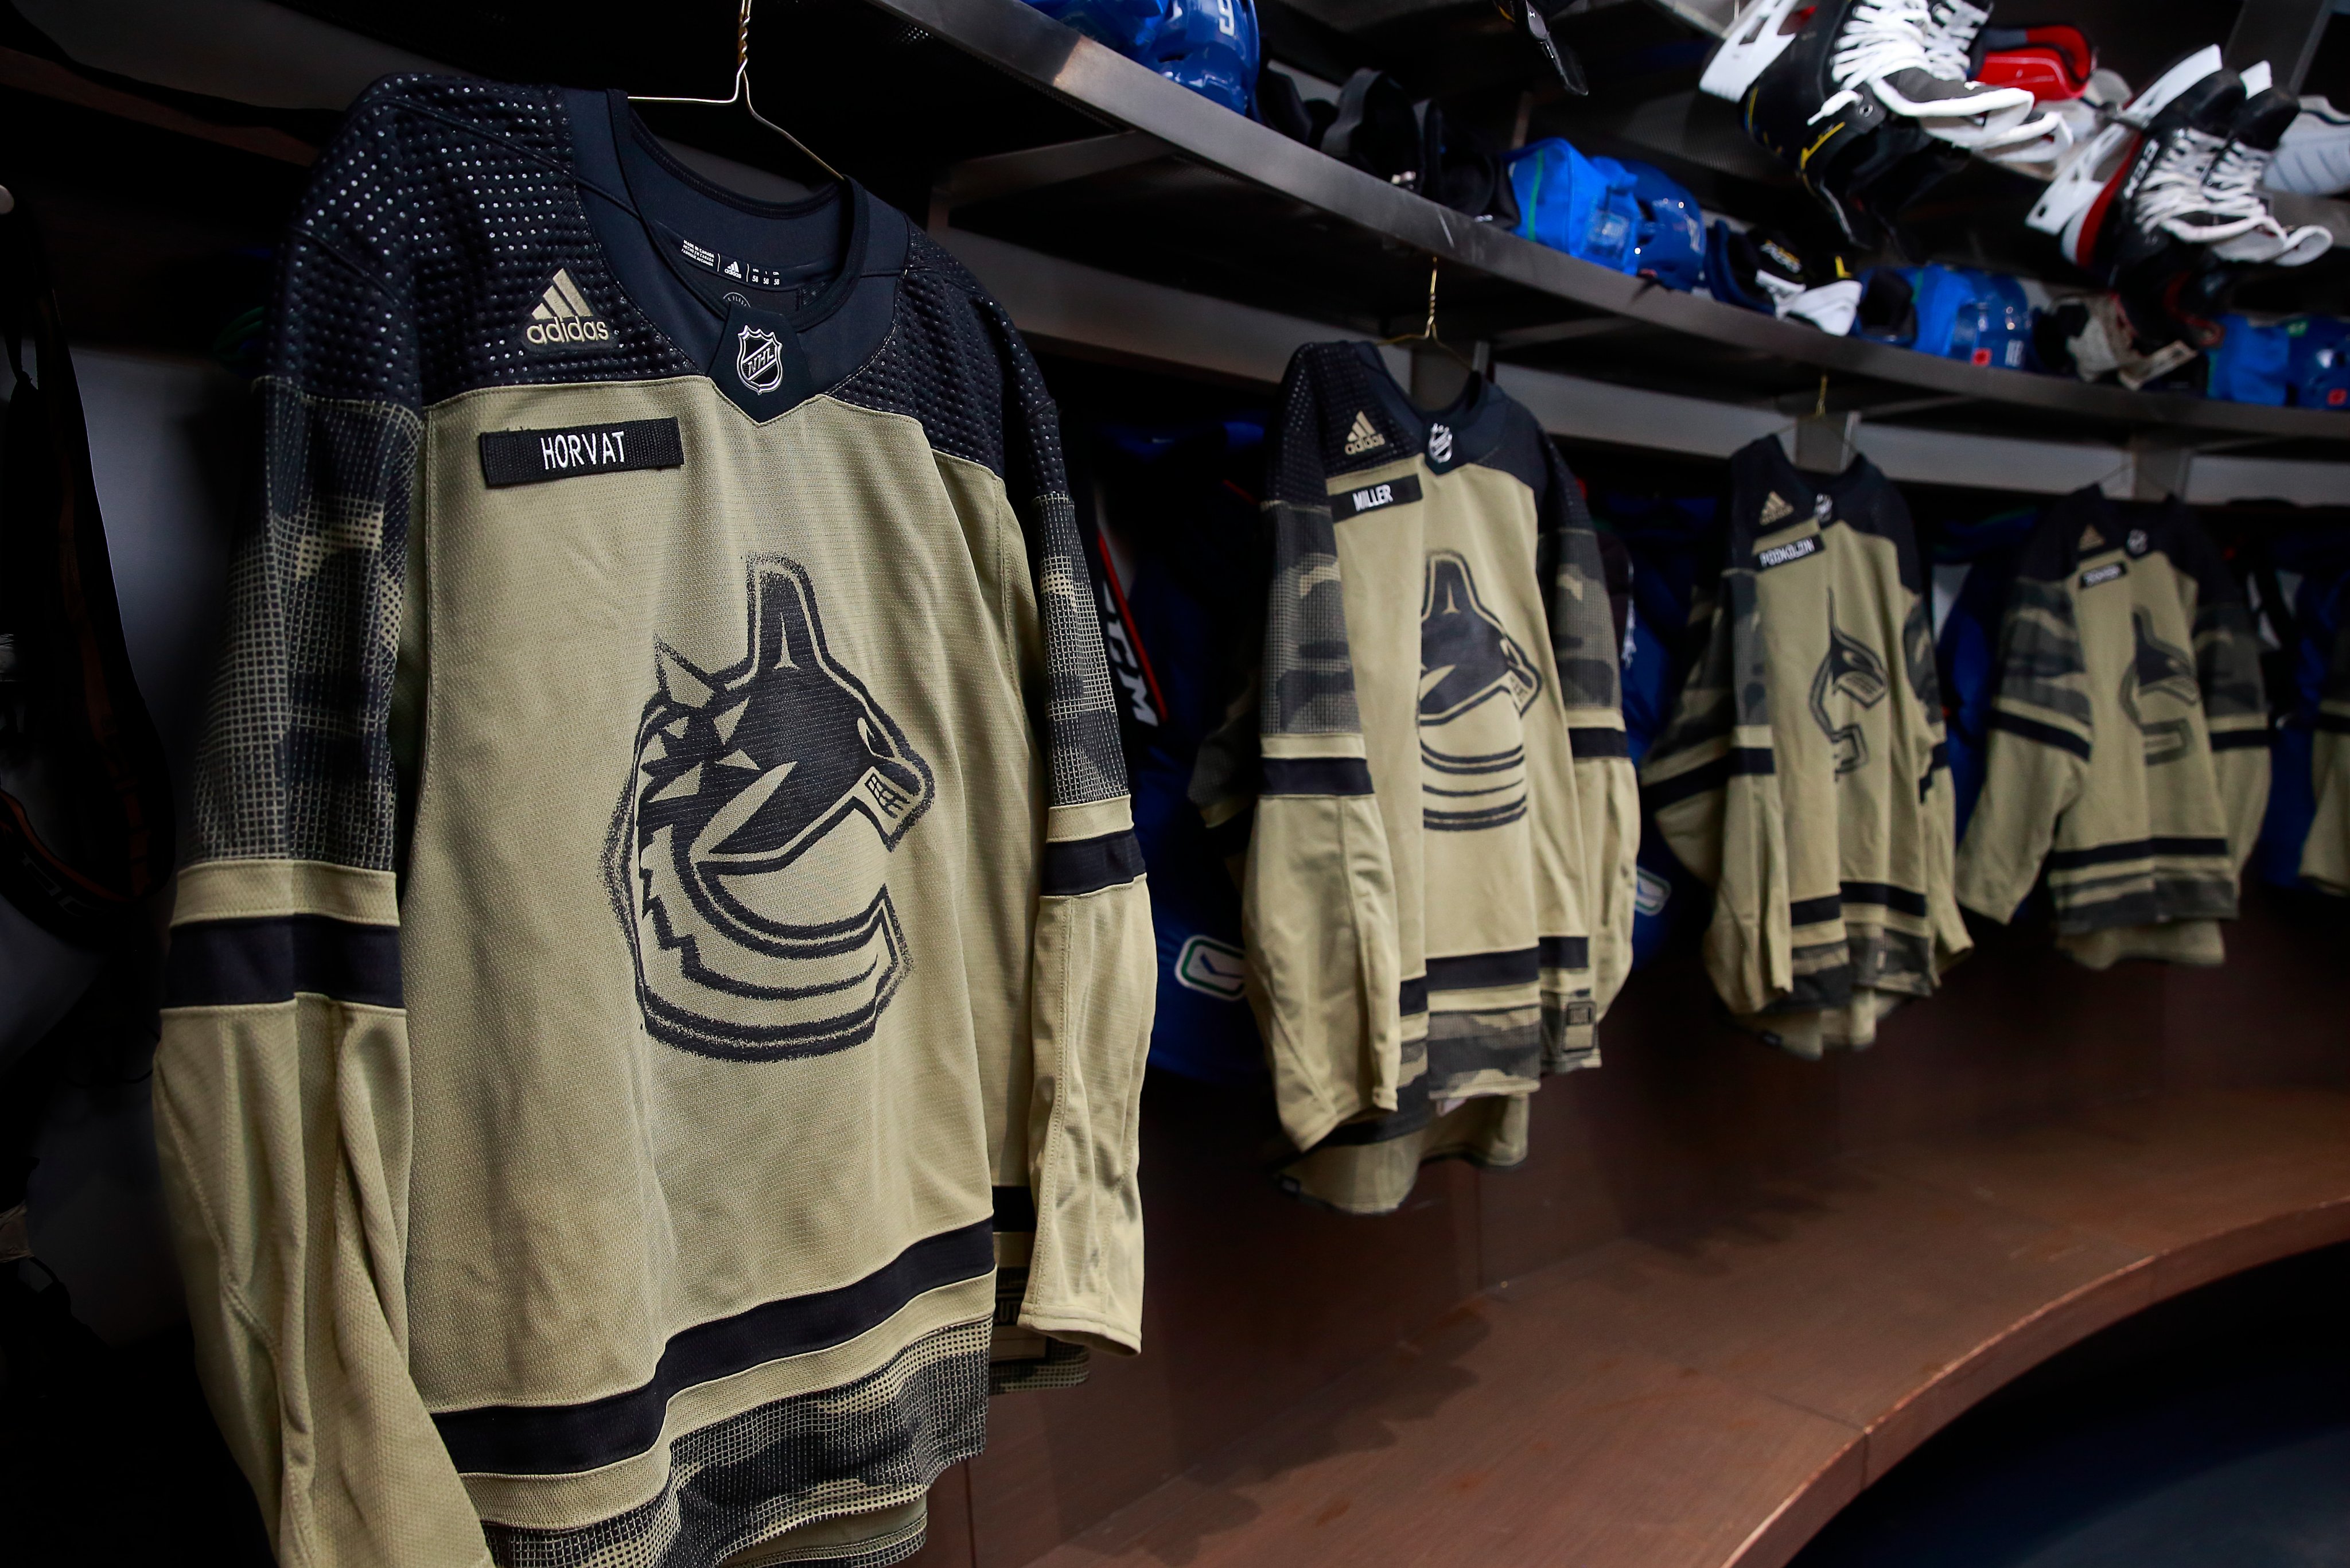 Our warm up jersey auction for tonight's @canucks game! In